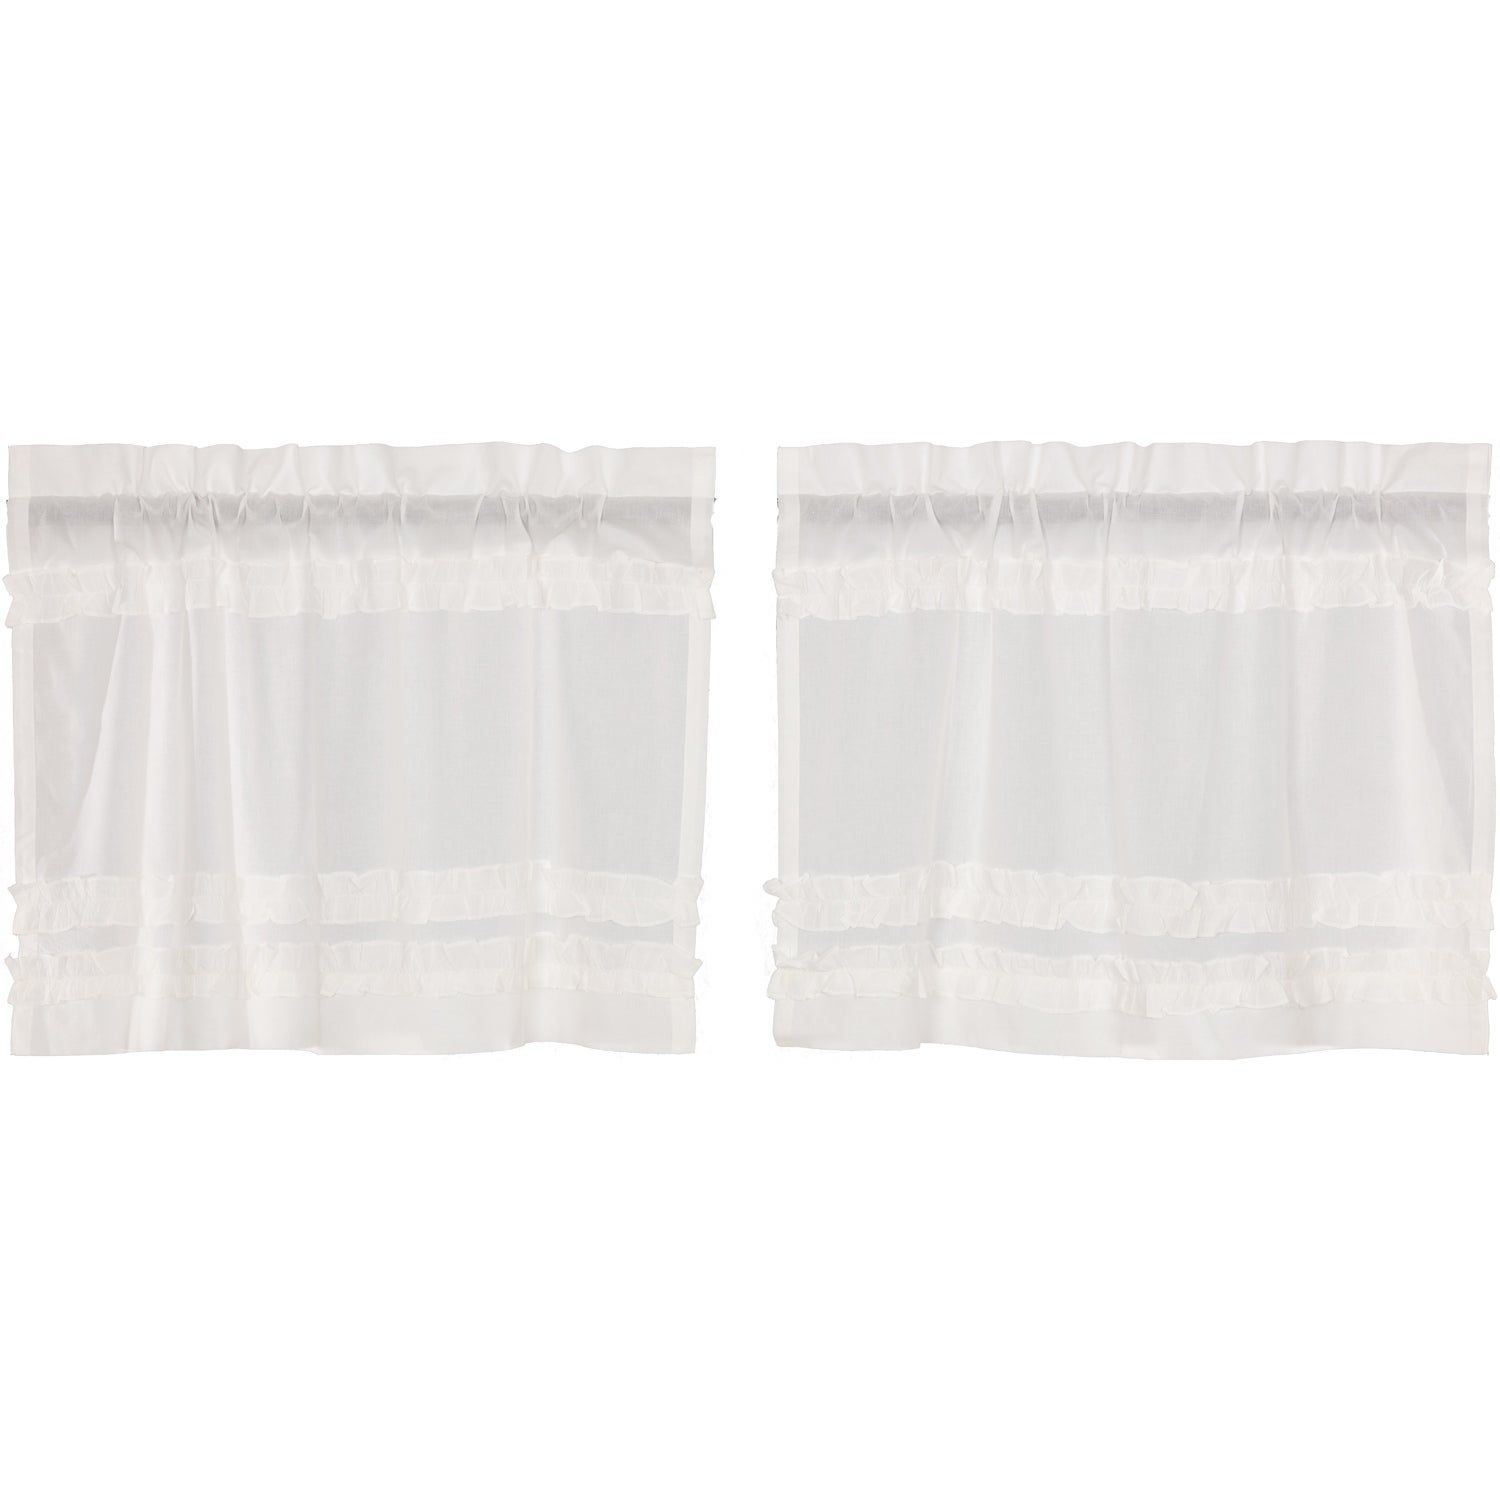 White Farmhouse Kitchen Curtains Vhc White Ruffled Sheer Petticoat Tier  Pair Rod Pocket Cotton Solid Color Ruched Ruffle In White Ruffled Sheer Petticoat Tier Pairs (View 2 of 20)